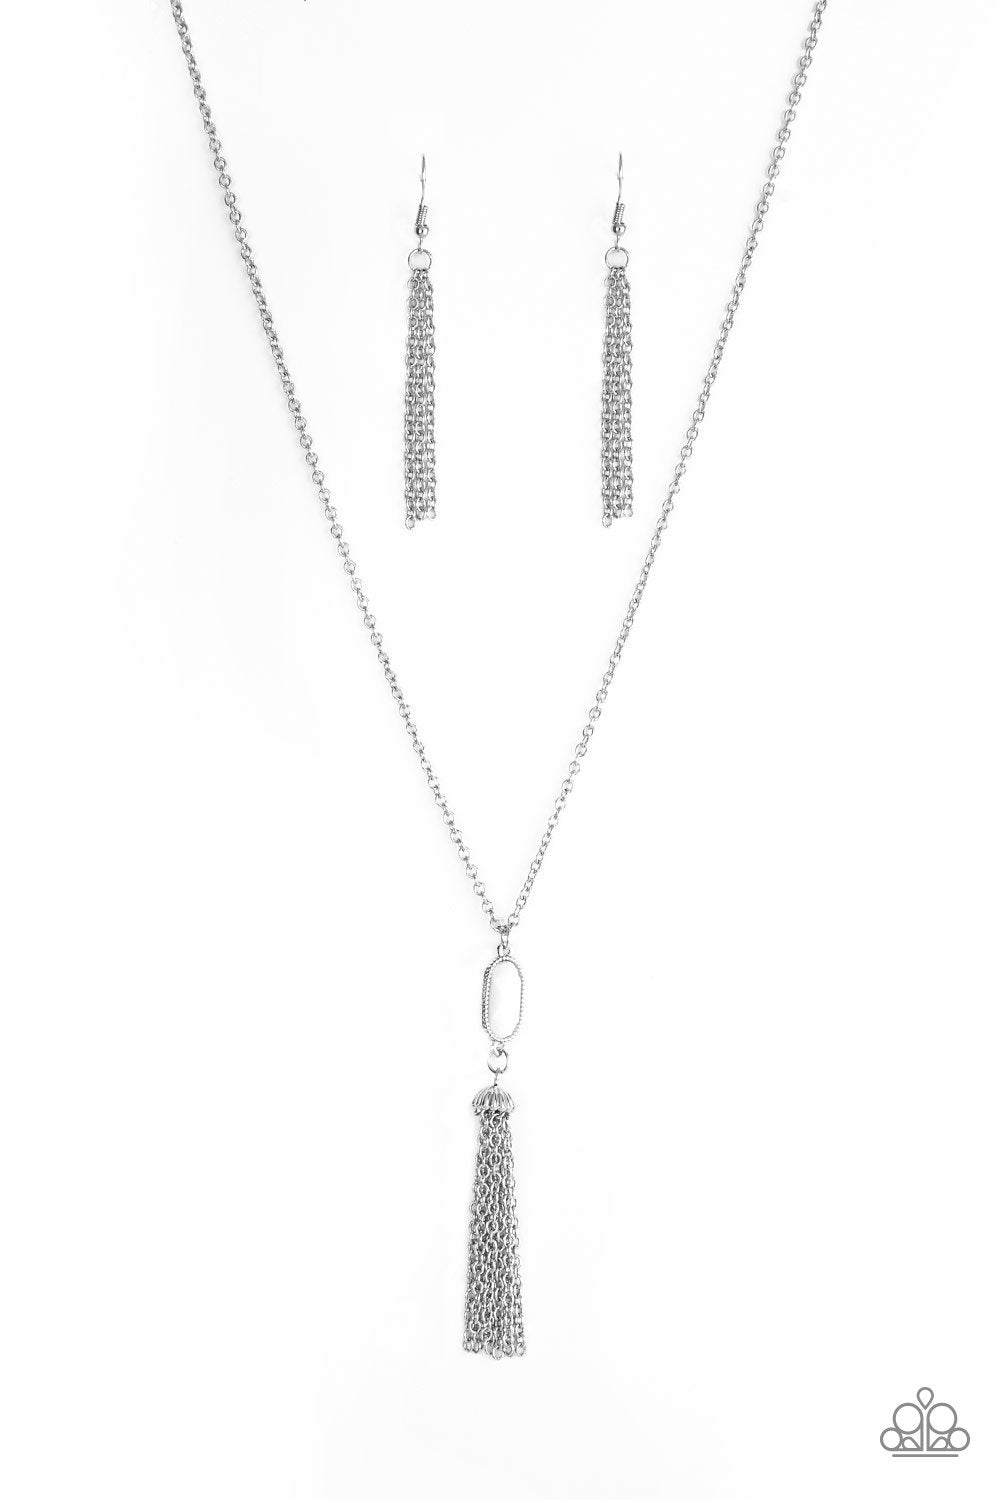 Tassel Tease White and Silver Necklace - Paparazzi Accessories - lightbox -CarasShop.com - $5 Jewelry by Cara Jewels